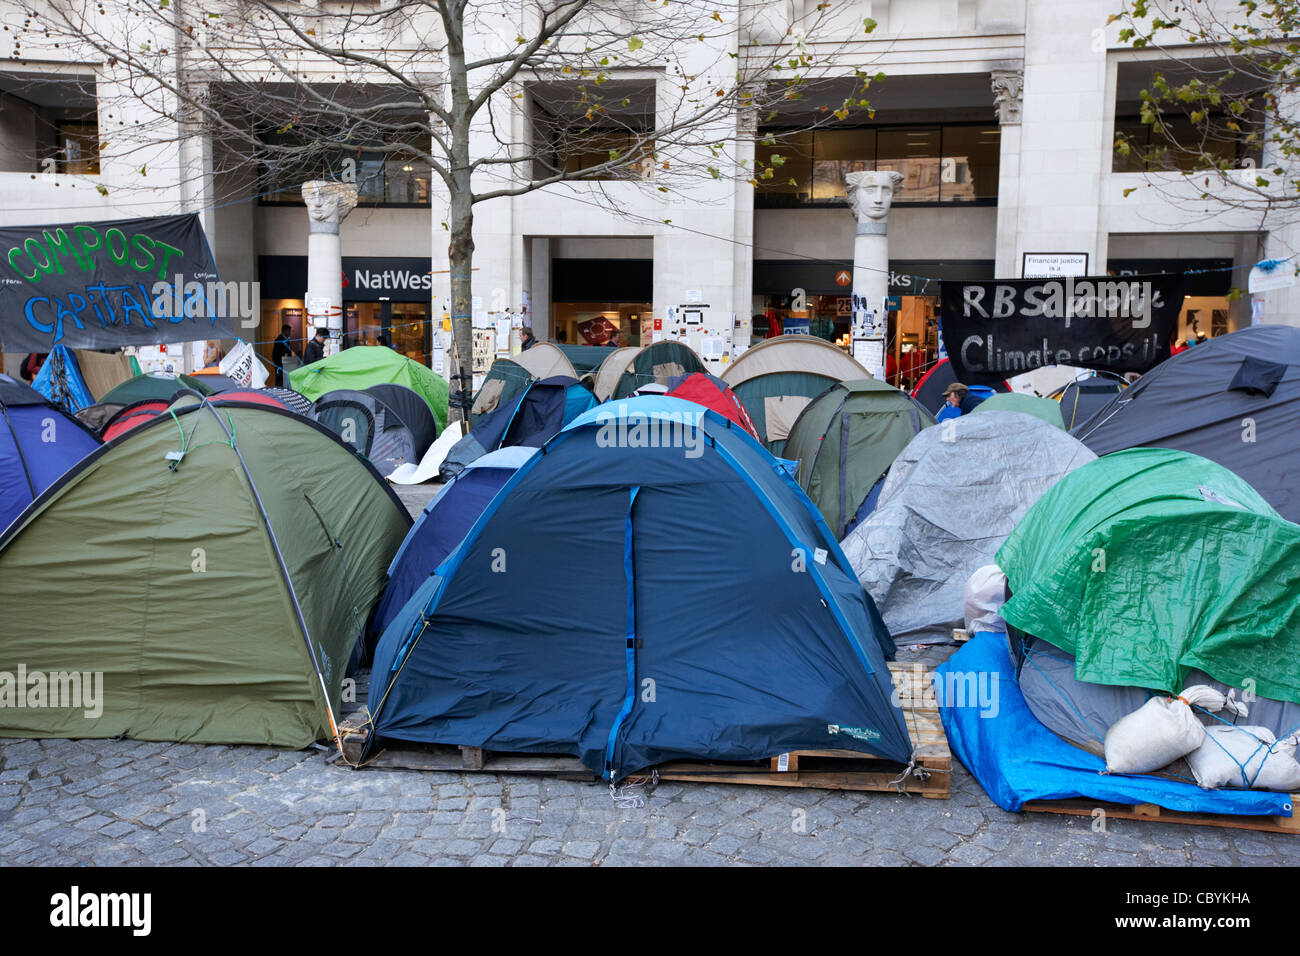 occupy london protest tent city in the city of London England UK United kingdom Stock Photo